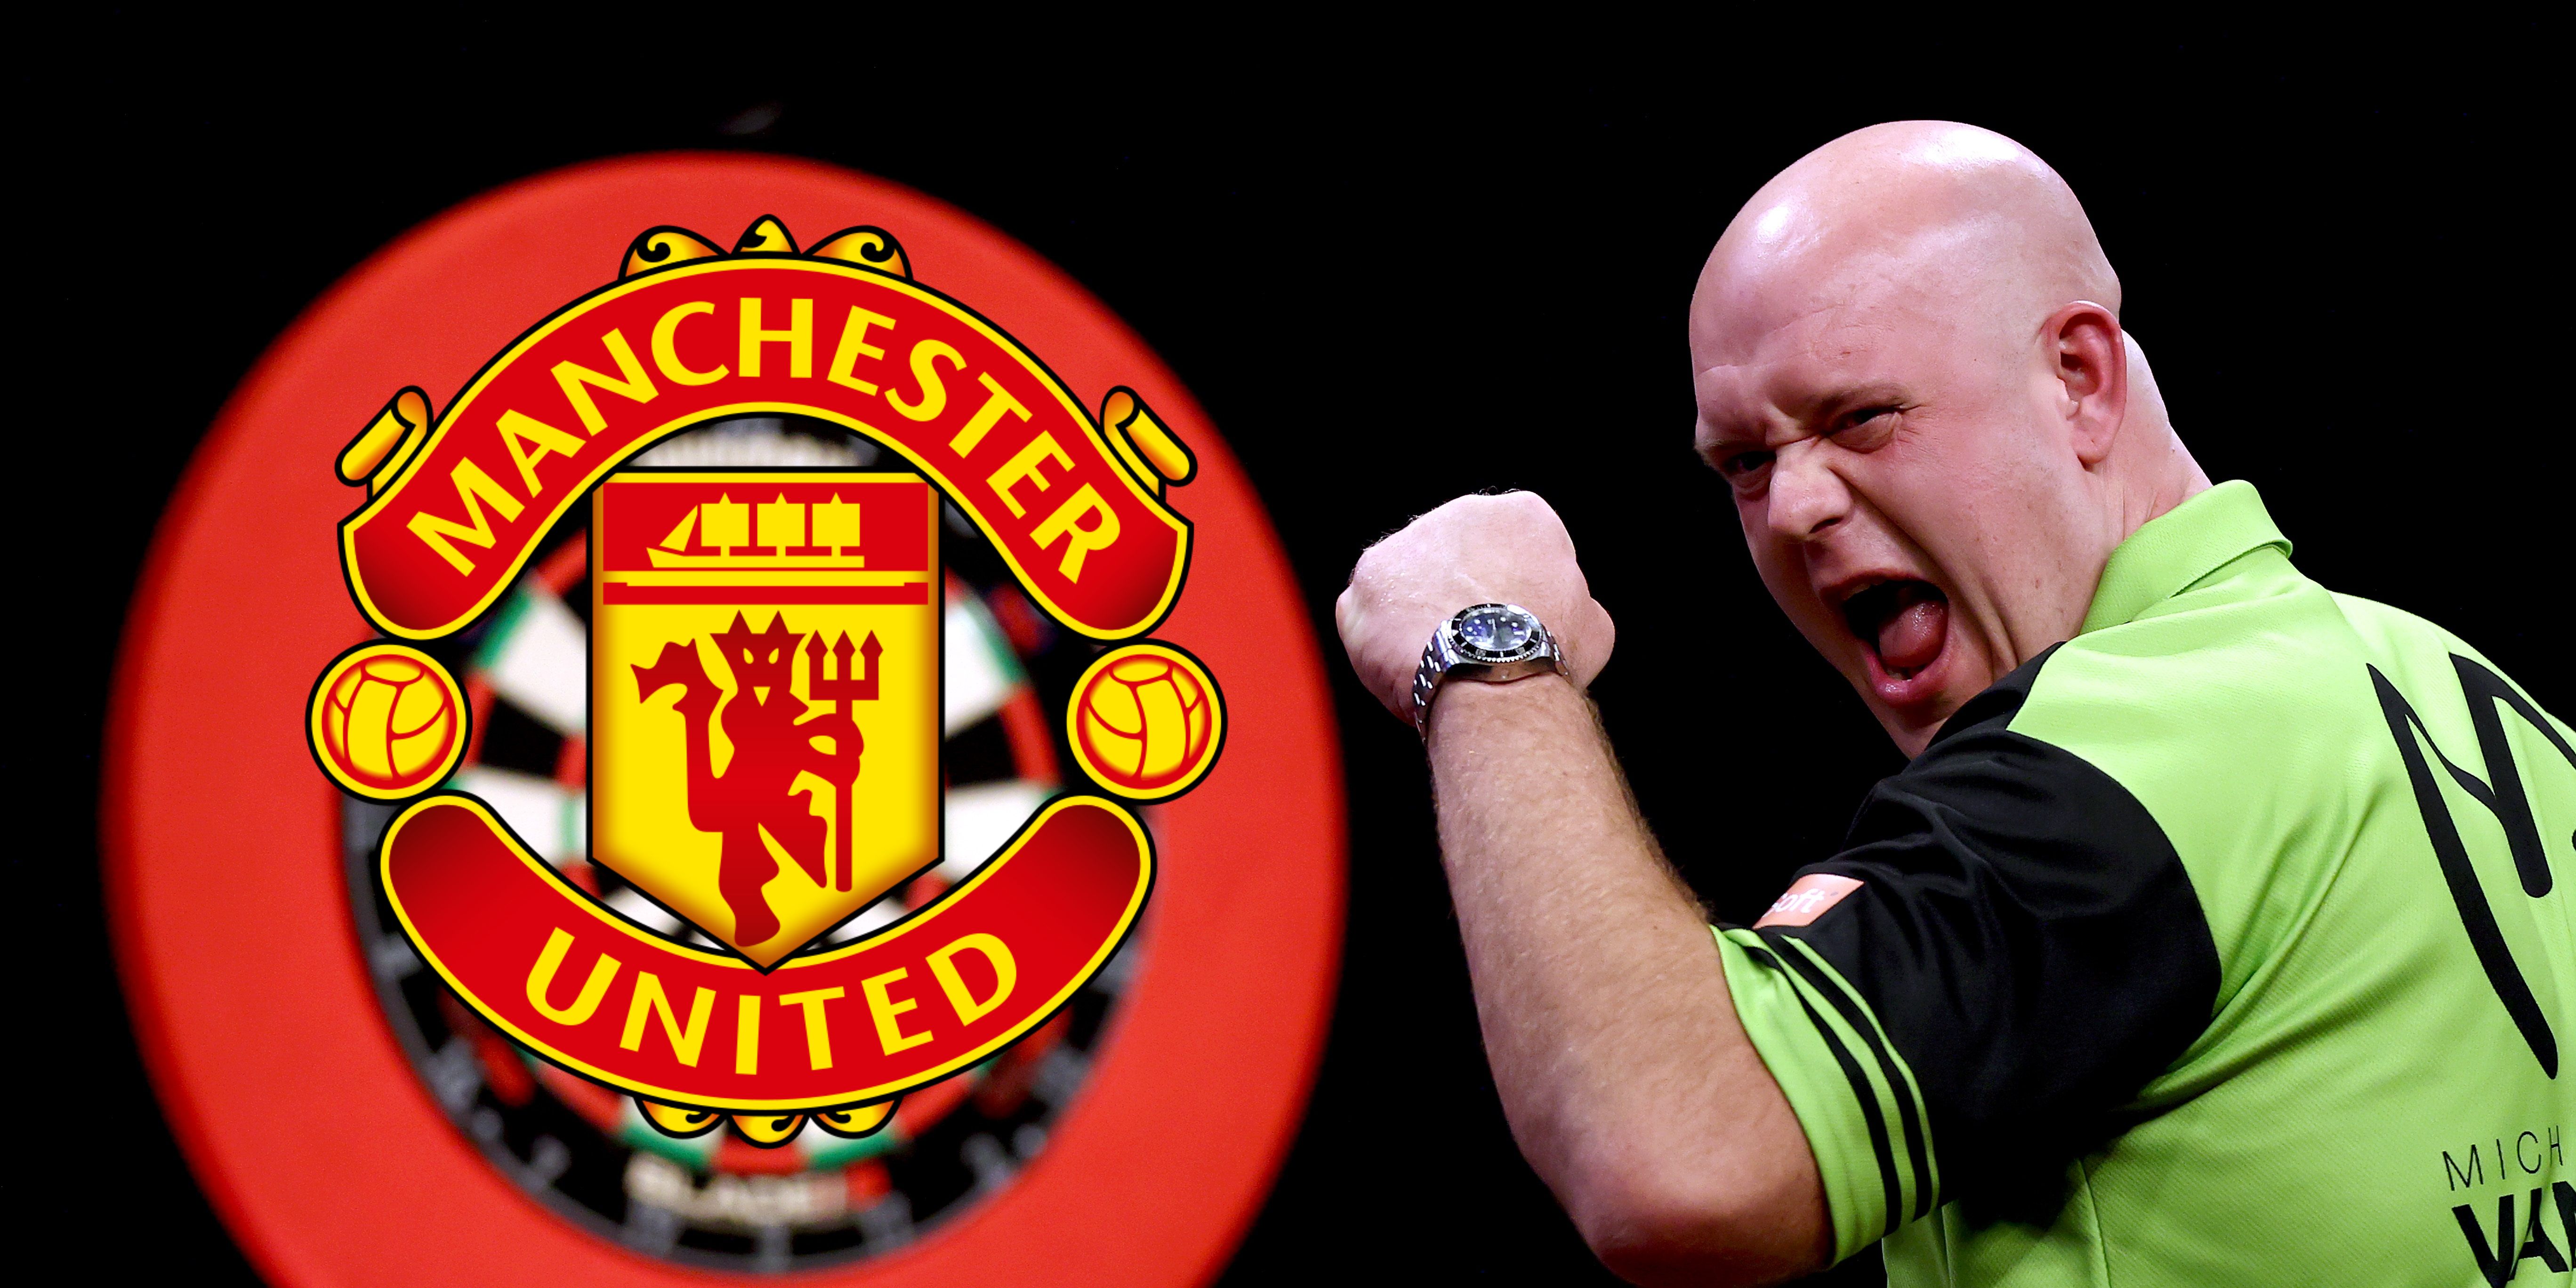 Darts legend savages Manchester United over transfer business in hilarious online swipe